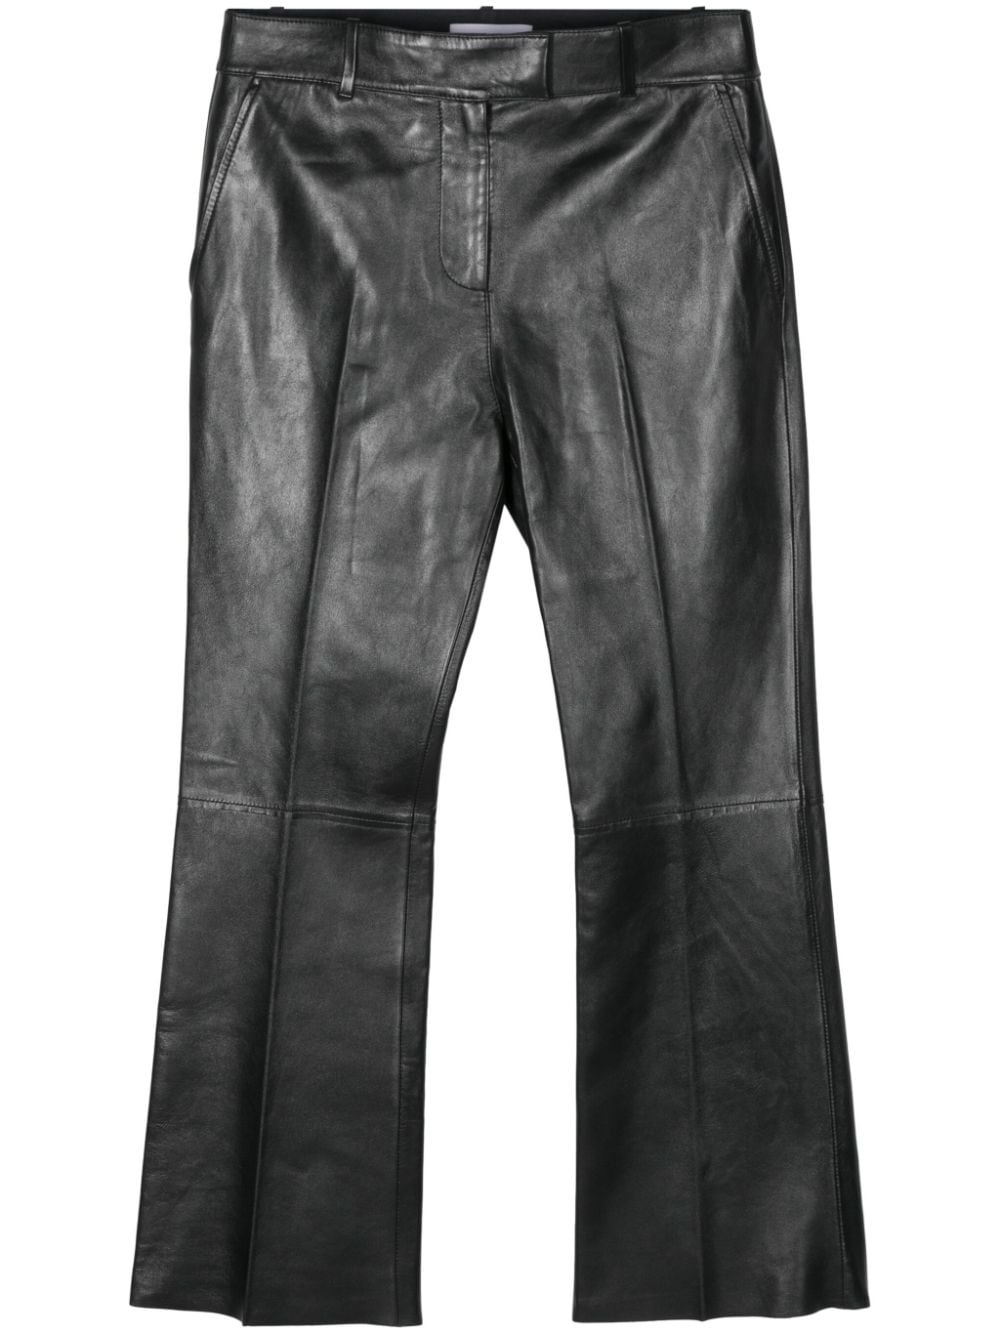 Zia tailored leather pants - 1